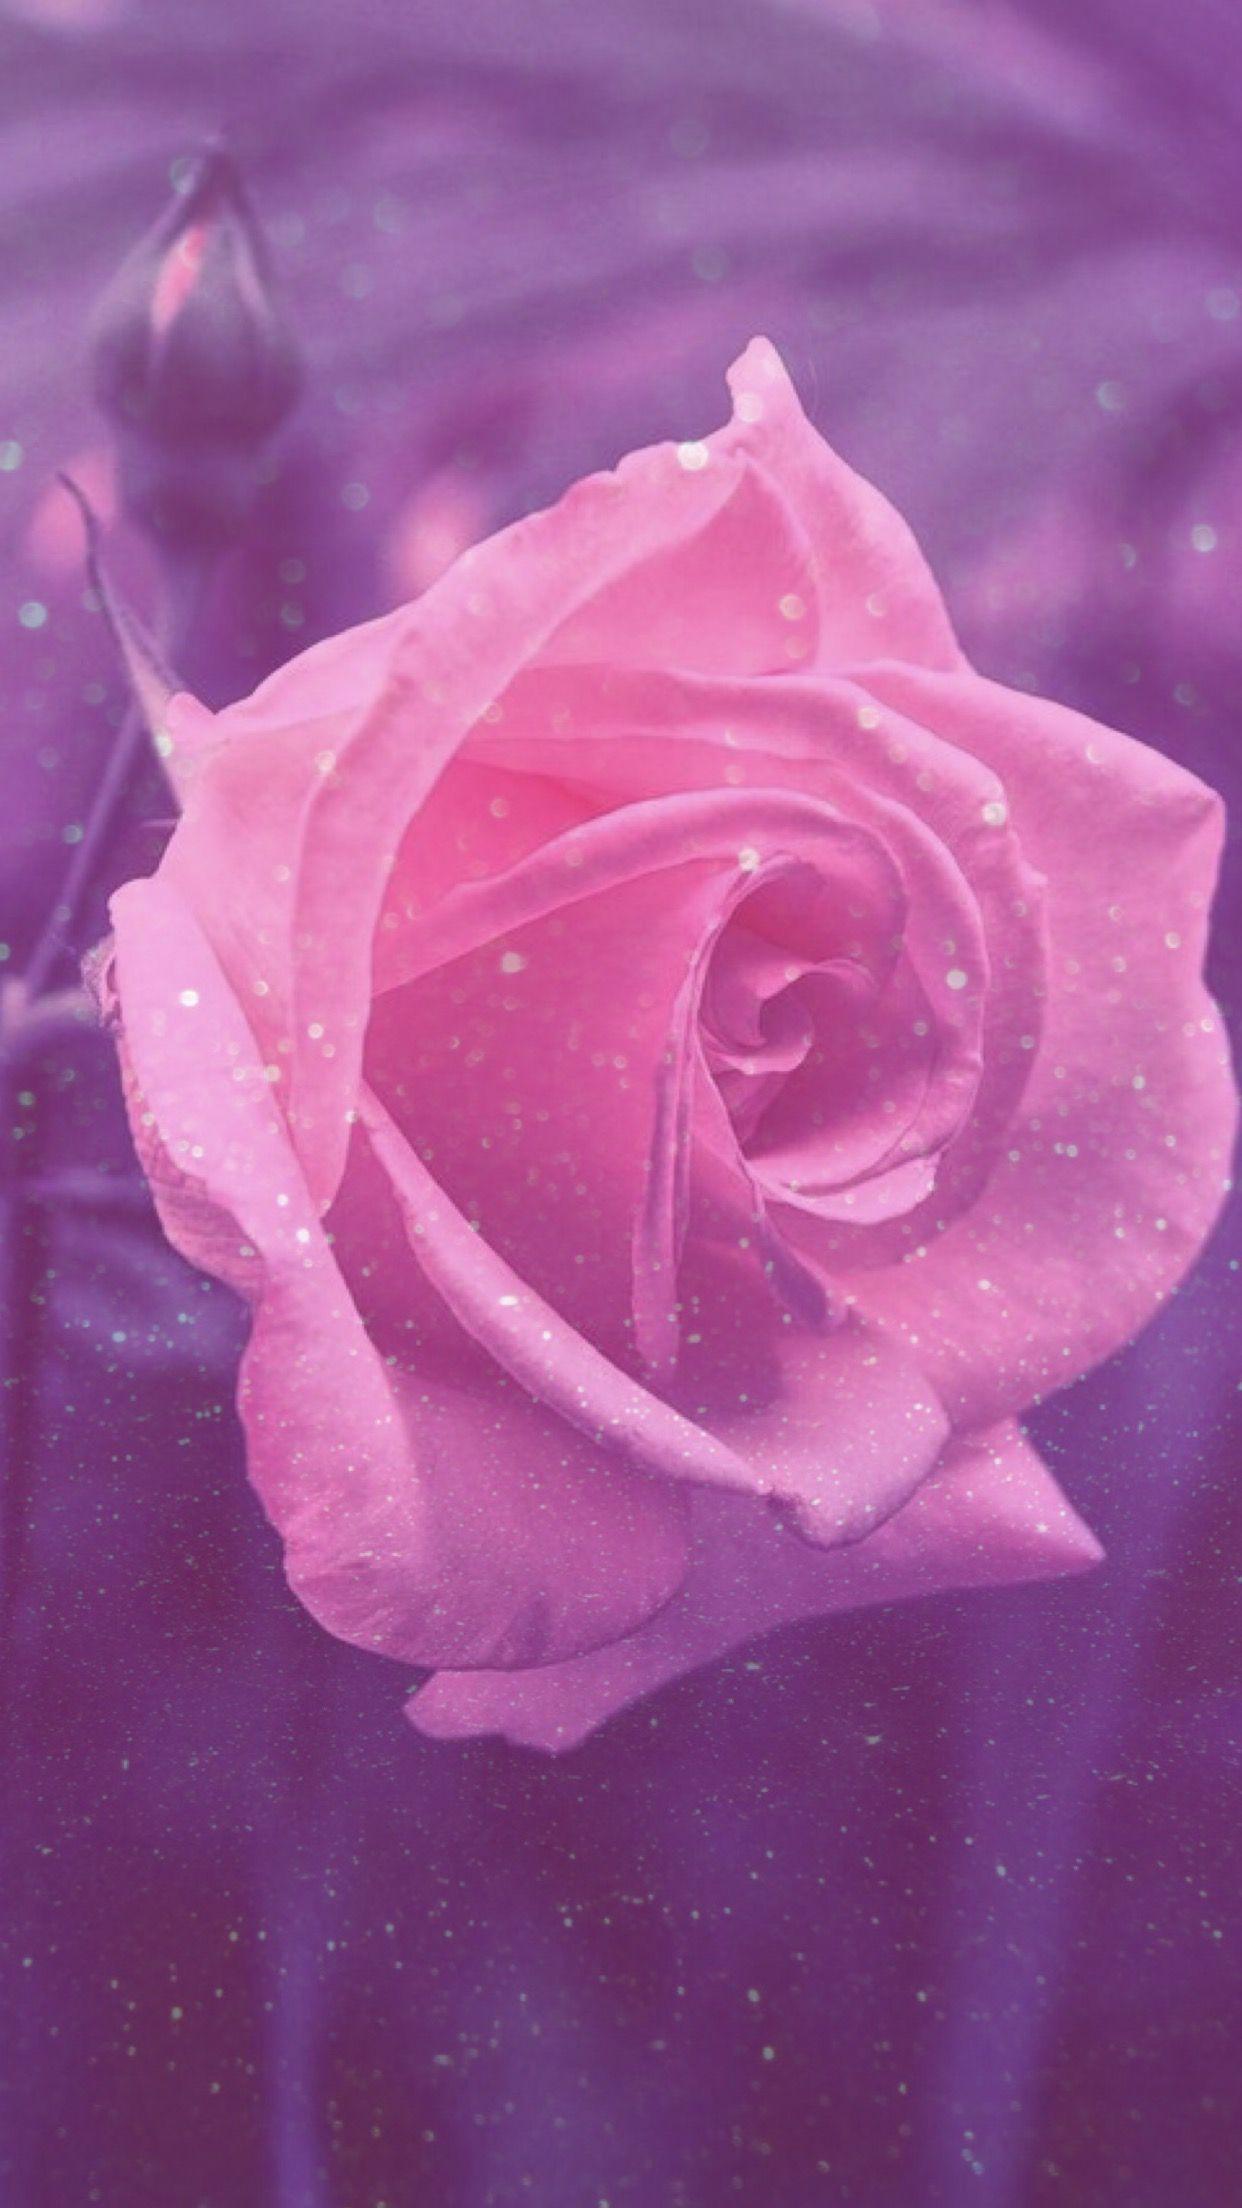 aesthetic pink roses wallpapers wallpaper cave on aesthetic rose wallpapers